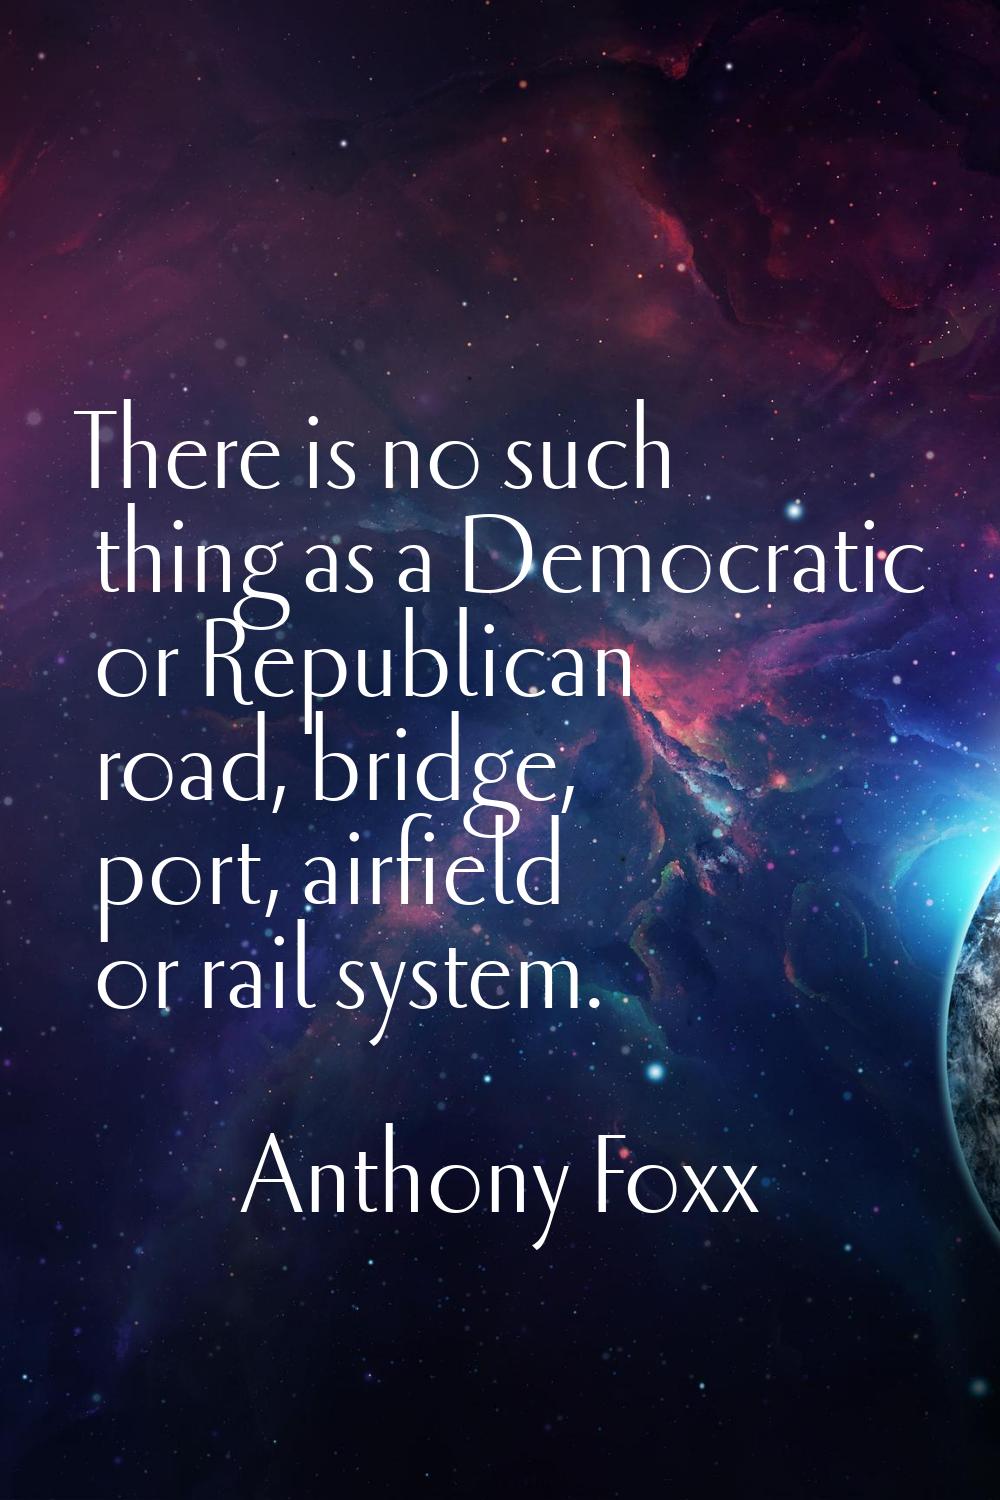 There is no such thing as a Democratic or Republican road, bridge, port, airfield or rail system.